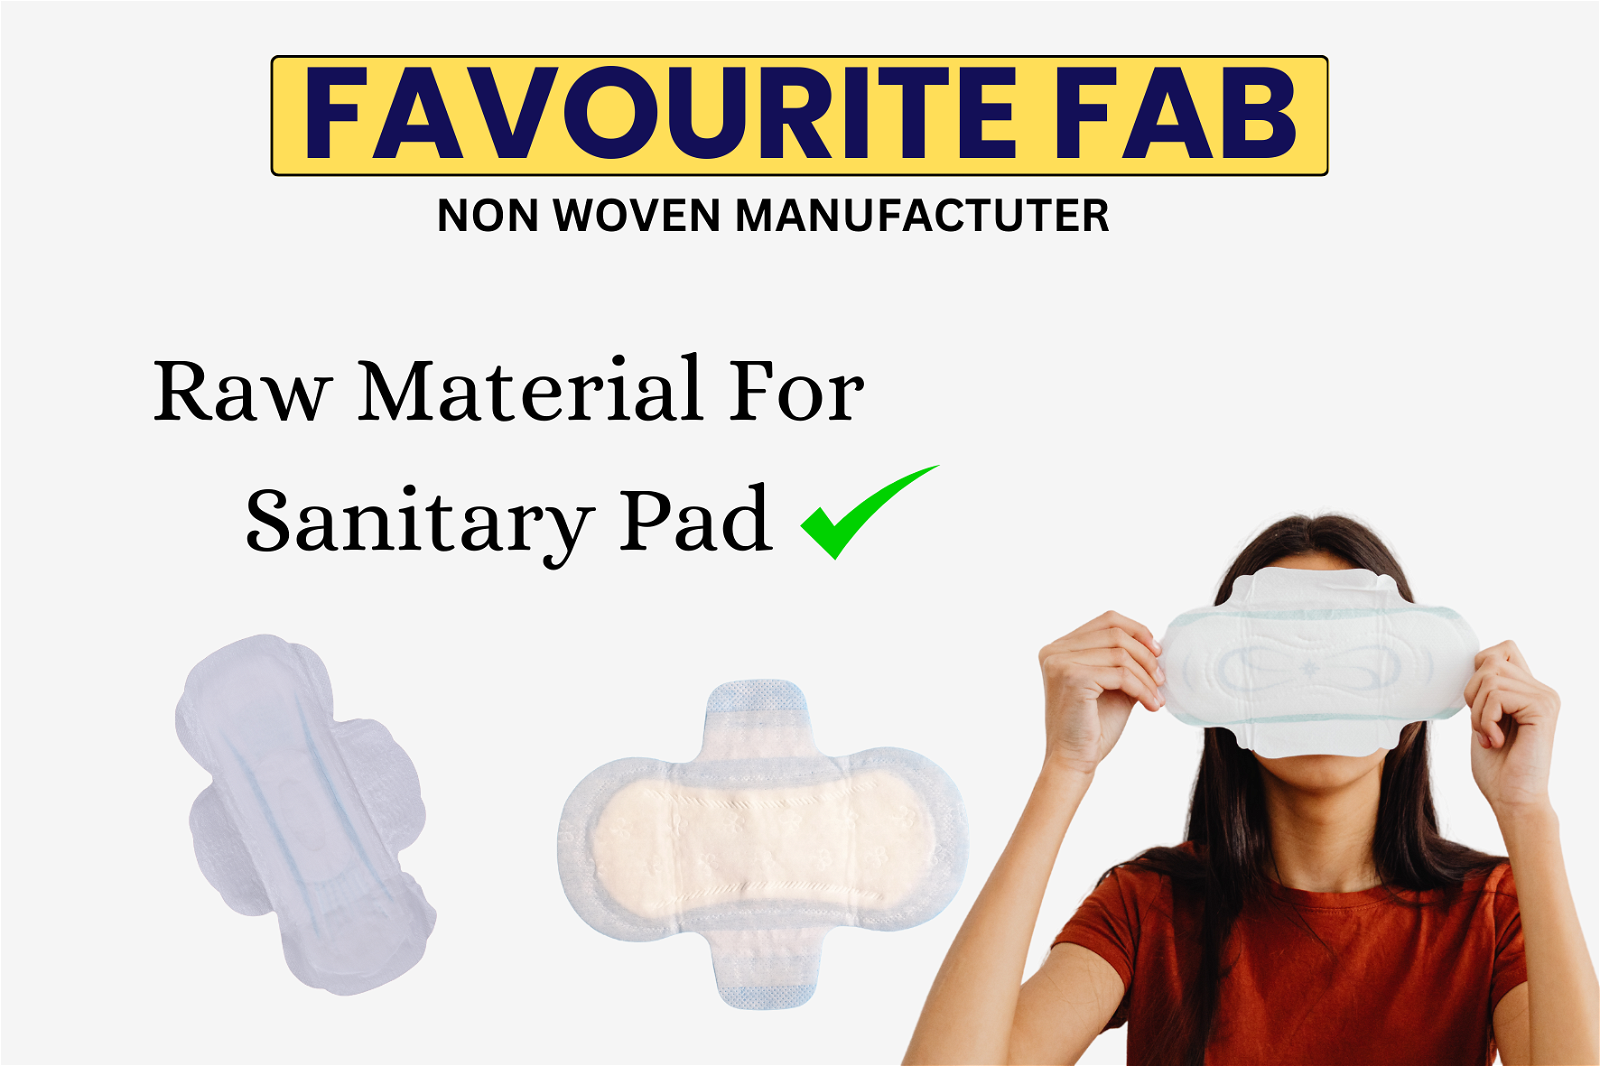 Raw Material For Sanitary Pad » No.1 Non woven fabric Manufacturer